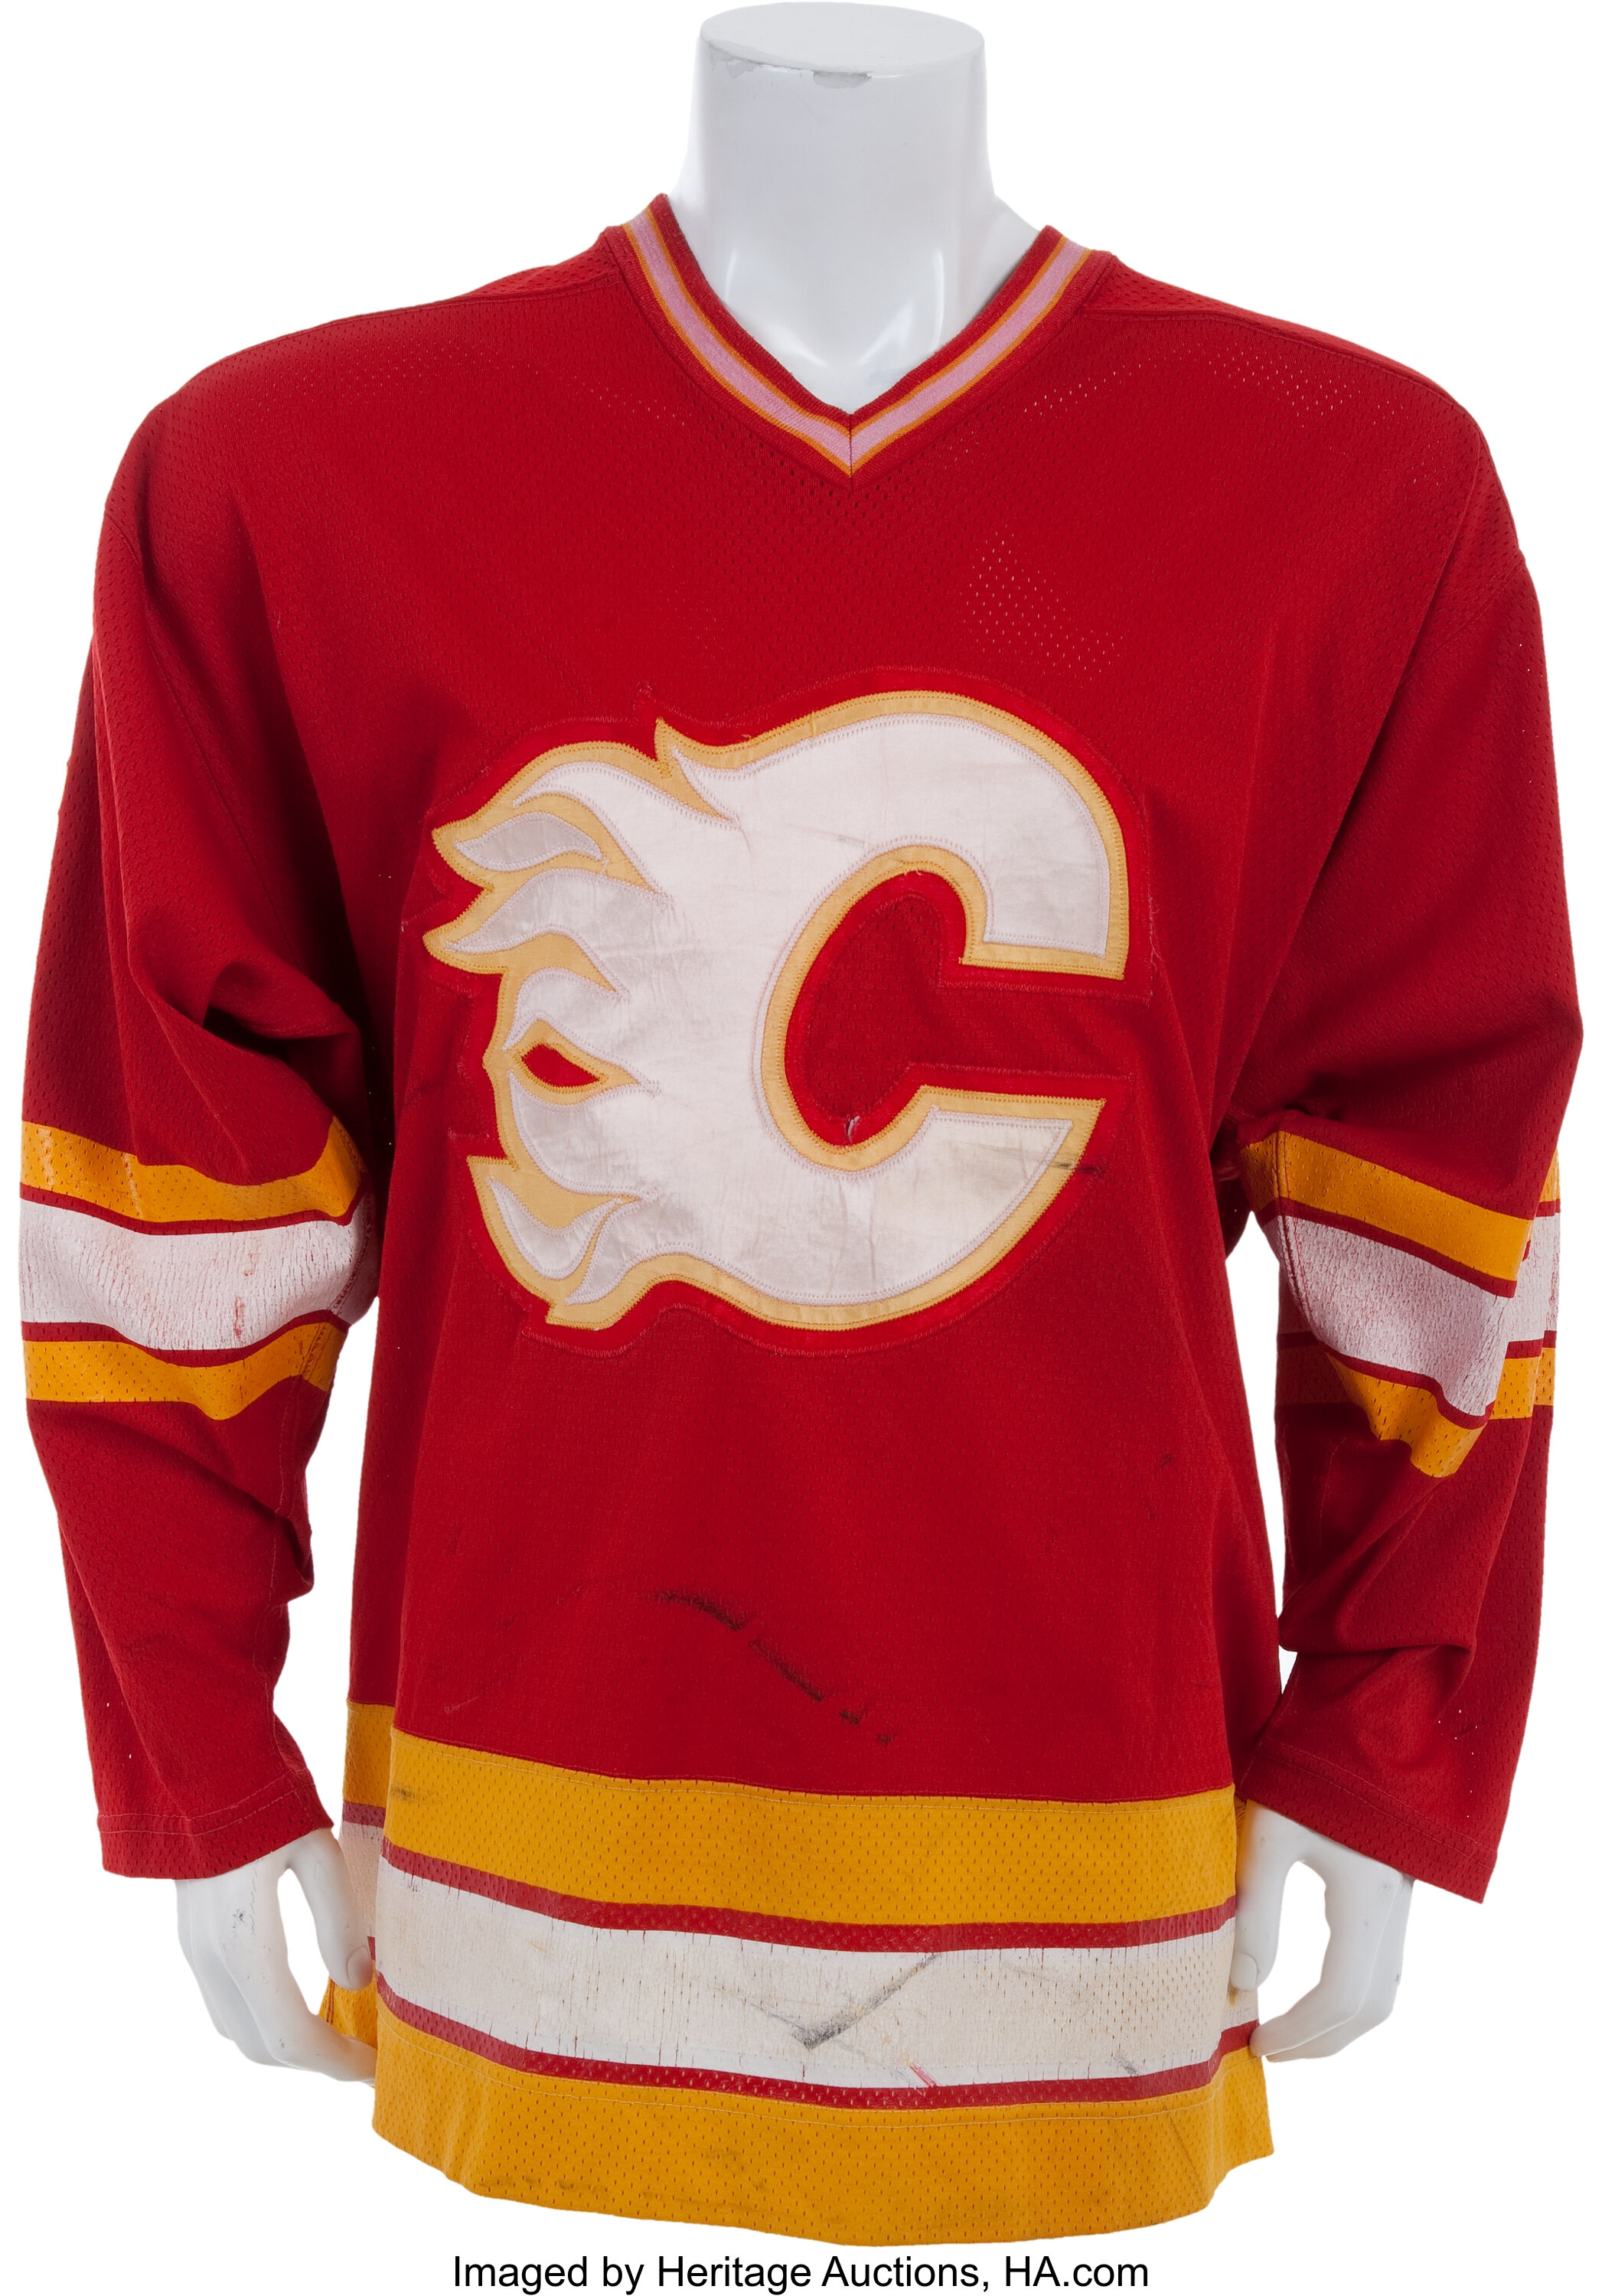 Calgary Flames Heritage Classic Jersey Reveal: Retro White It Is